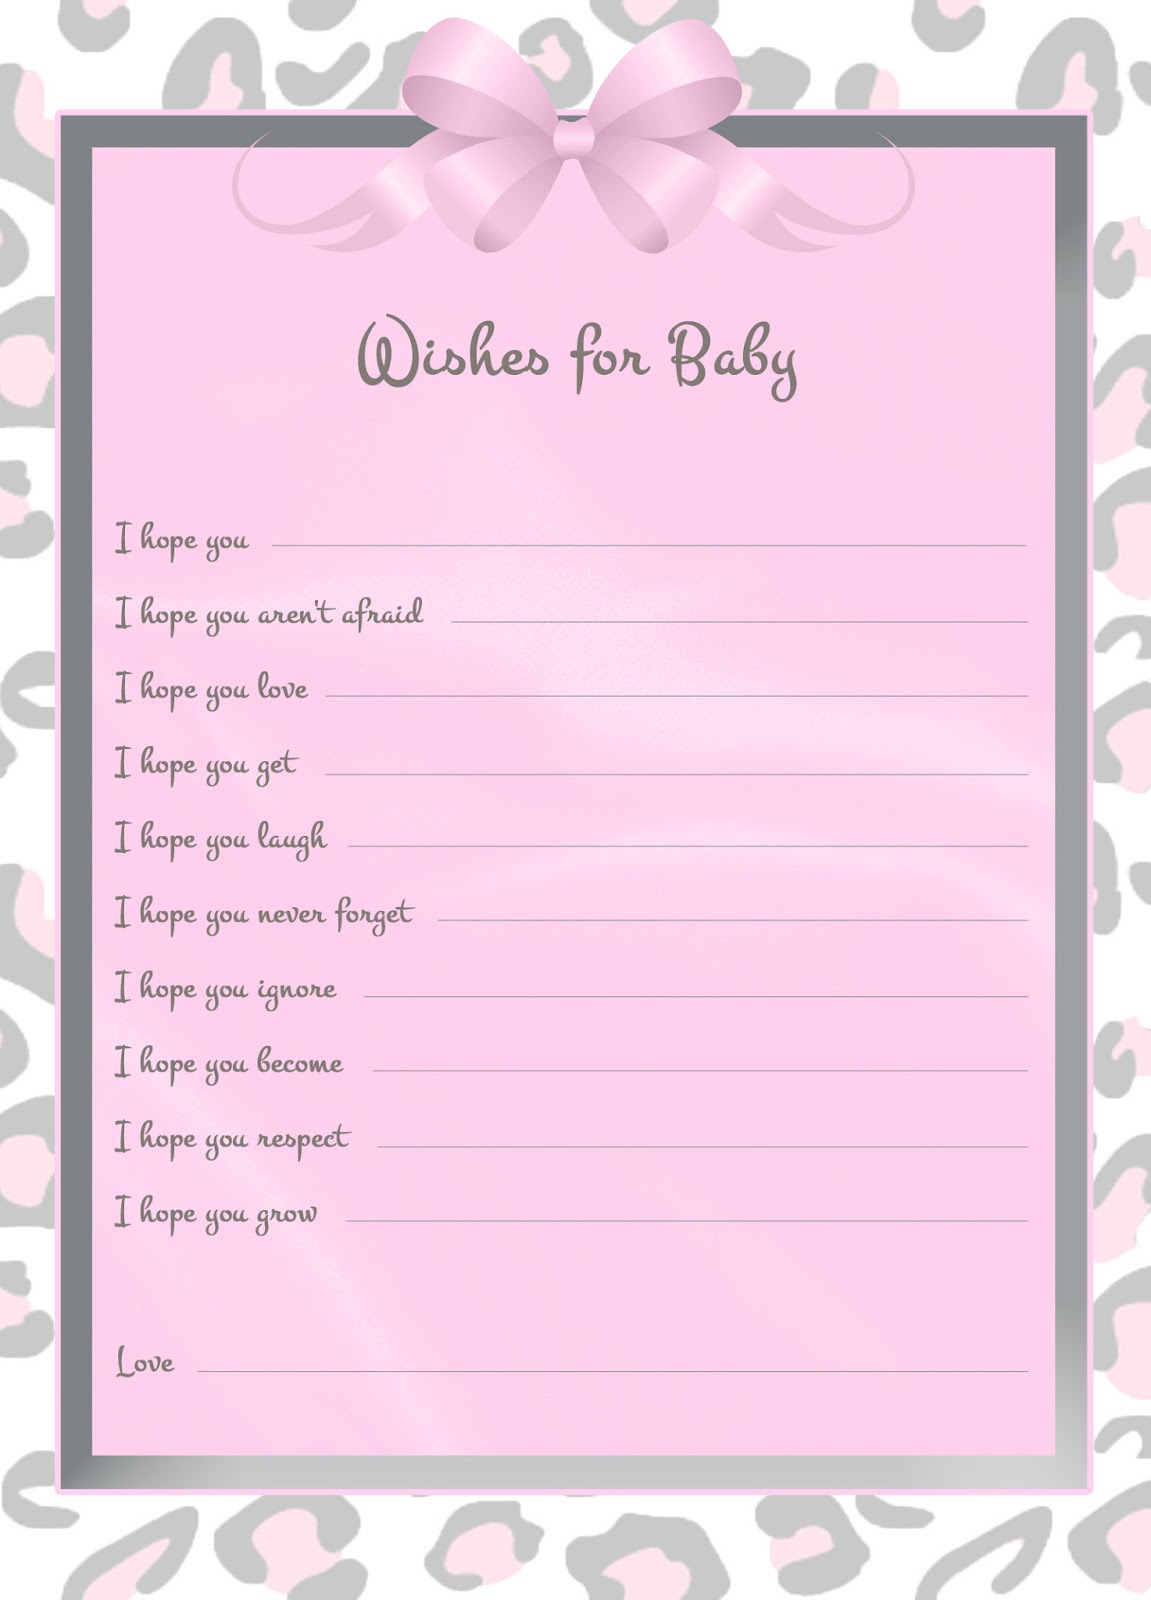 wishes-for-baby-printable-template-free-free-printable-templates